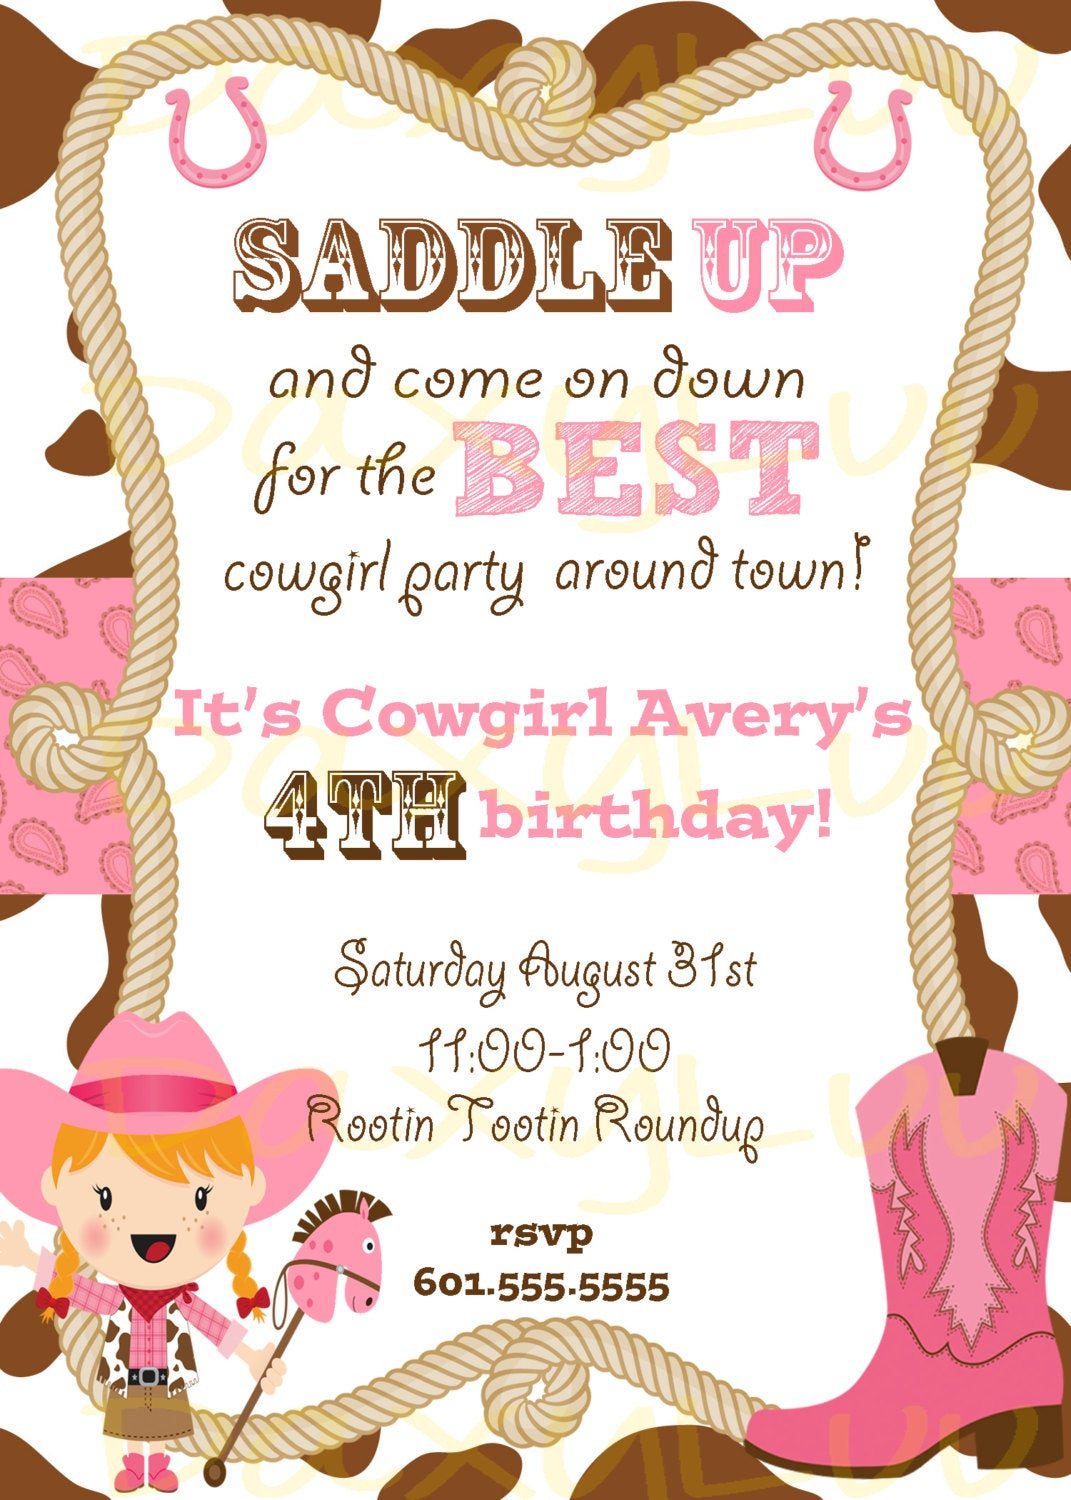 Cowgirl Birthday Party Invitations
 Cowgirl Birthday Party Invitation Pink and Brown